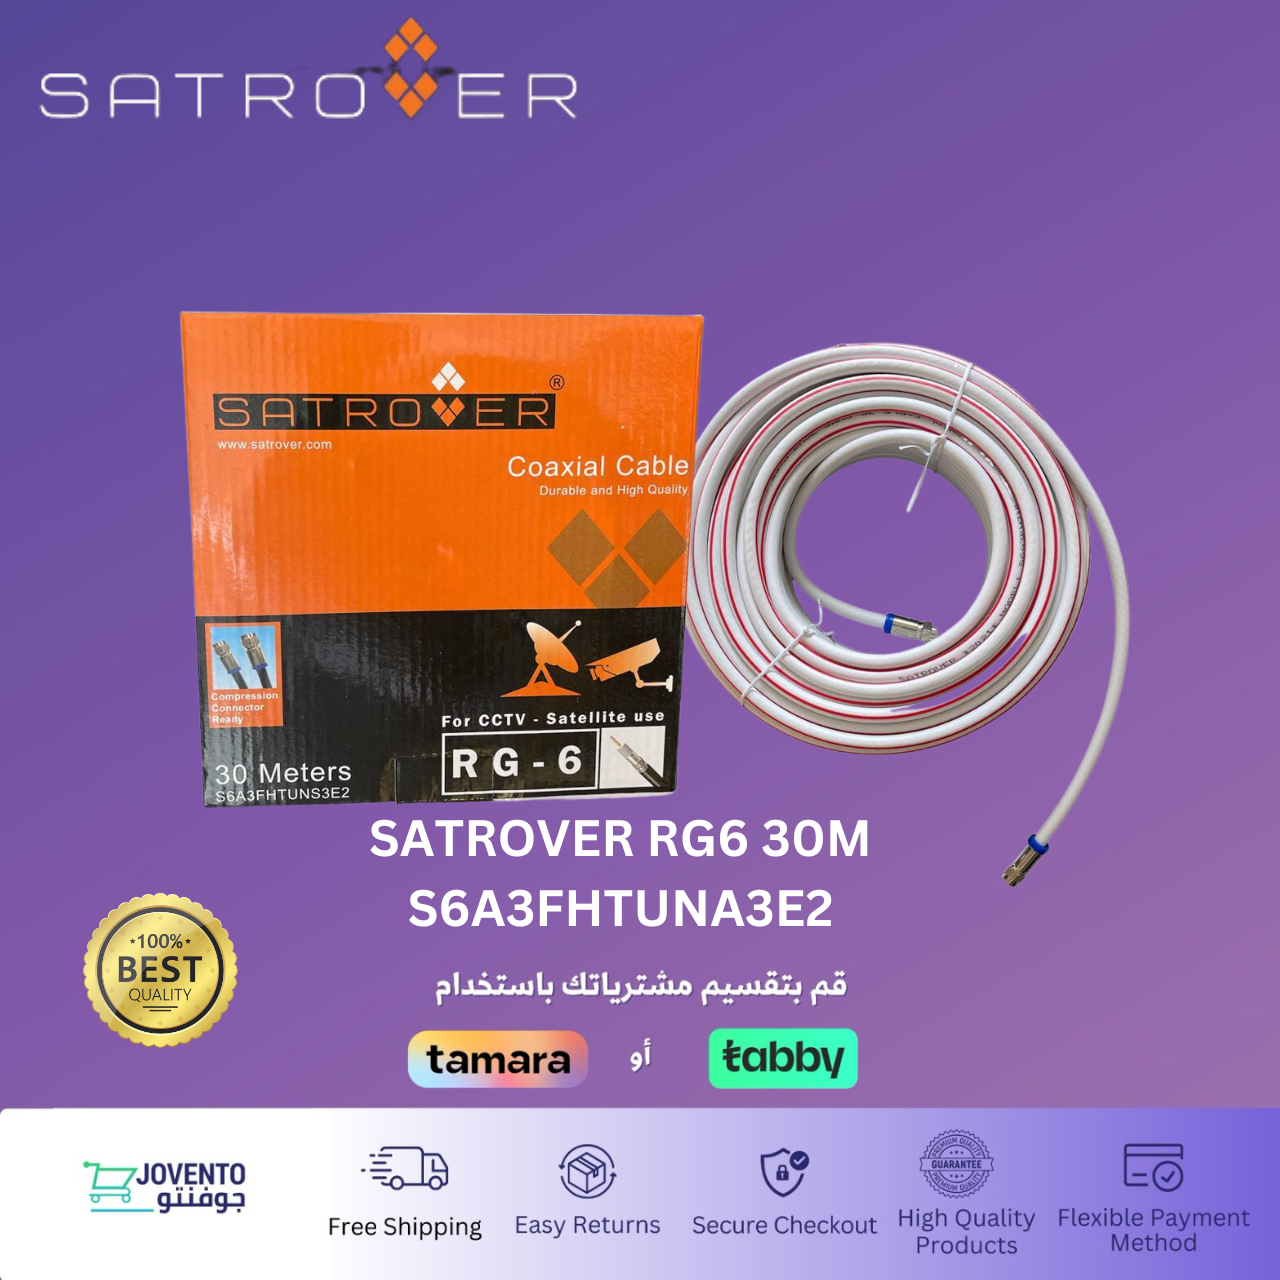 SATROVER 30M RG6 Coaxial Cable - Durable and High-Quality